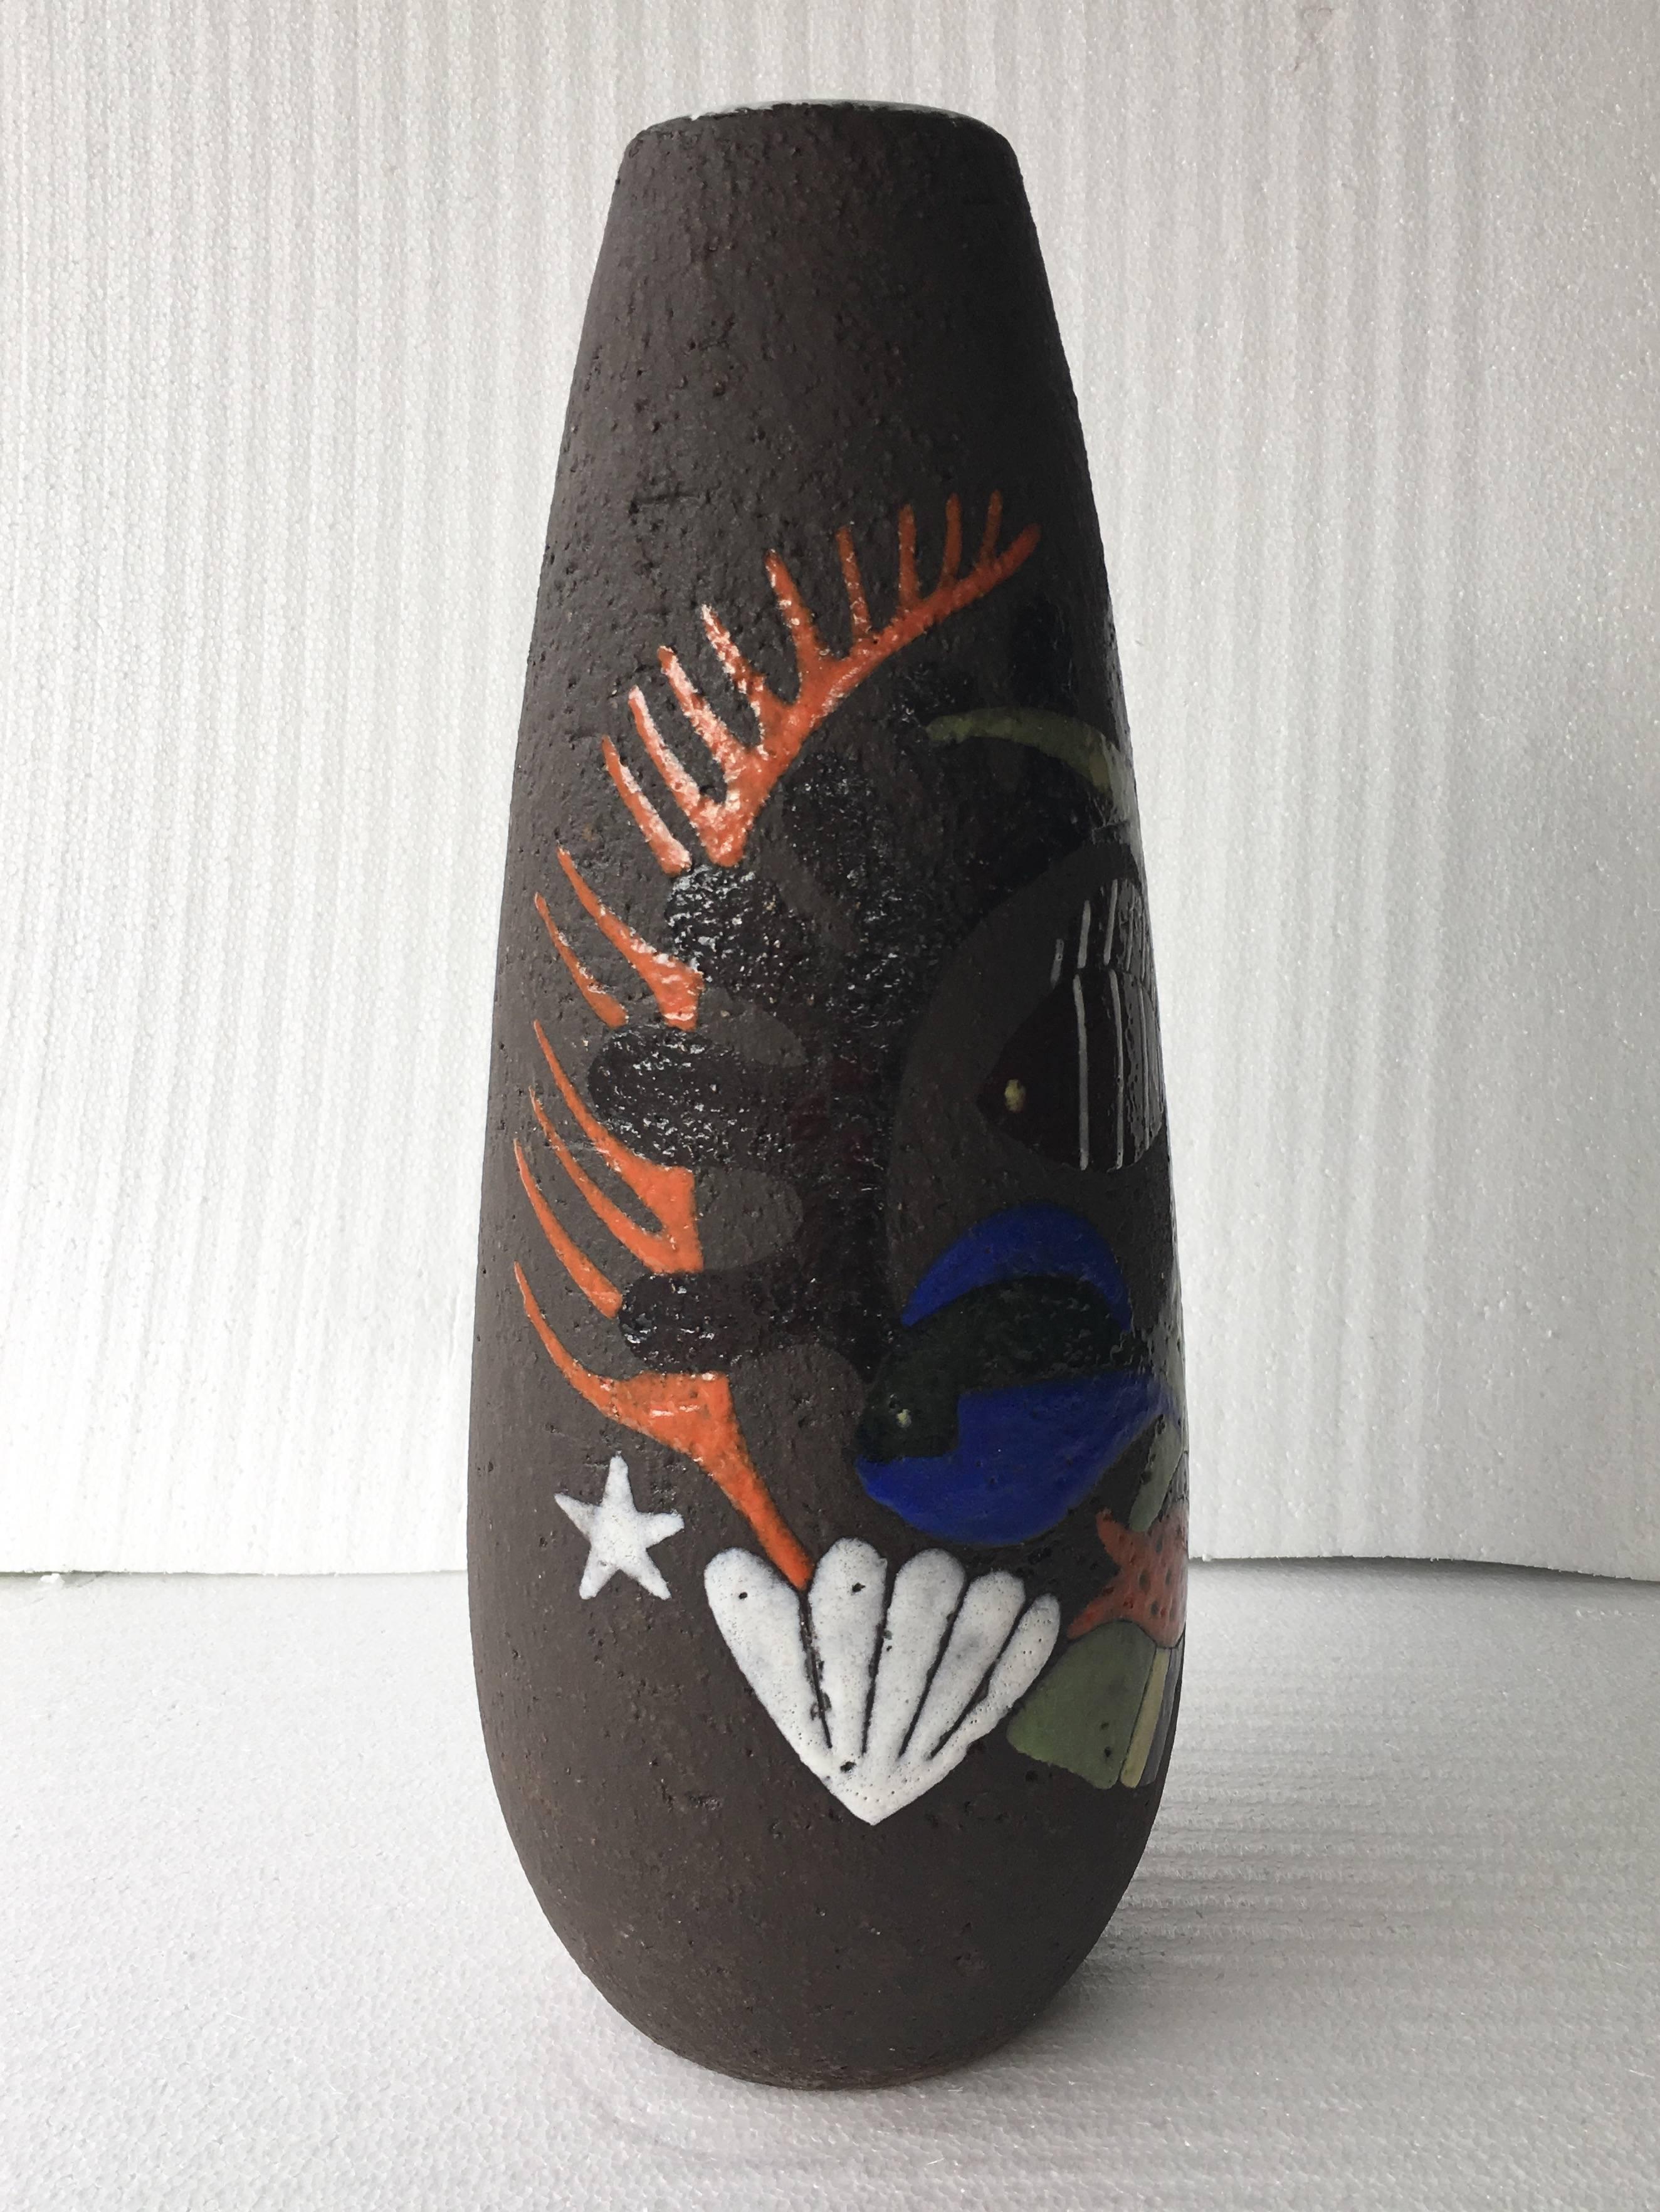 Truly unique and rare pottery vase from Swedish ceramic firm Upsala-Ekeby, designed by Anna-Lisa Thomson, 1940s.

It depicts an aquatic marine life motif of fish, sea urchin, coral, and seaweed against a matte, textured background in one of her